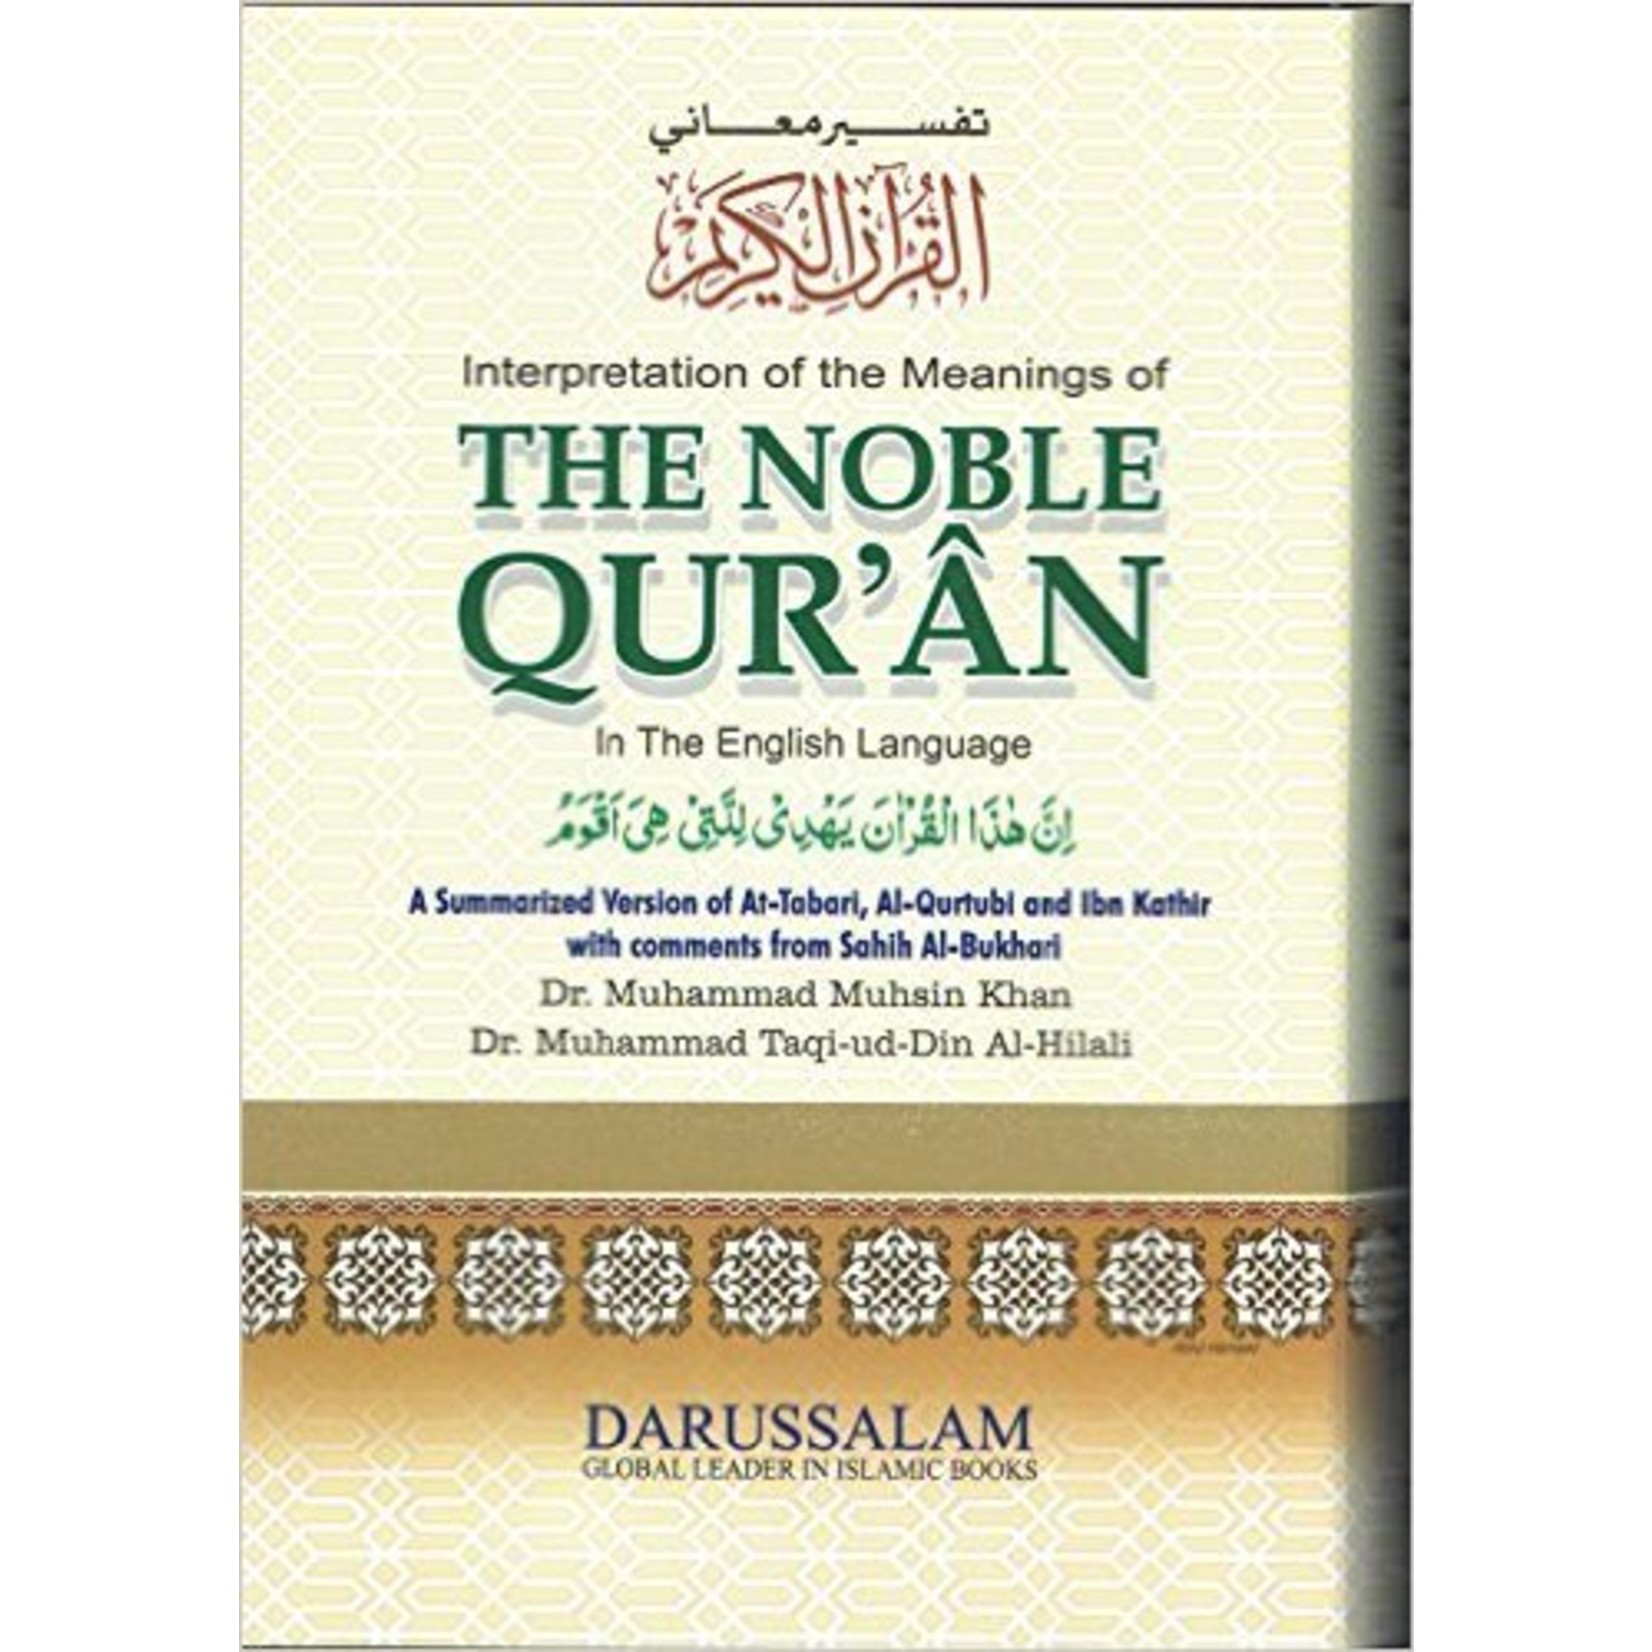 The Noble Qur'an (english)